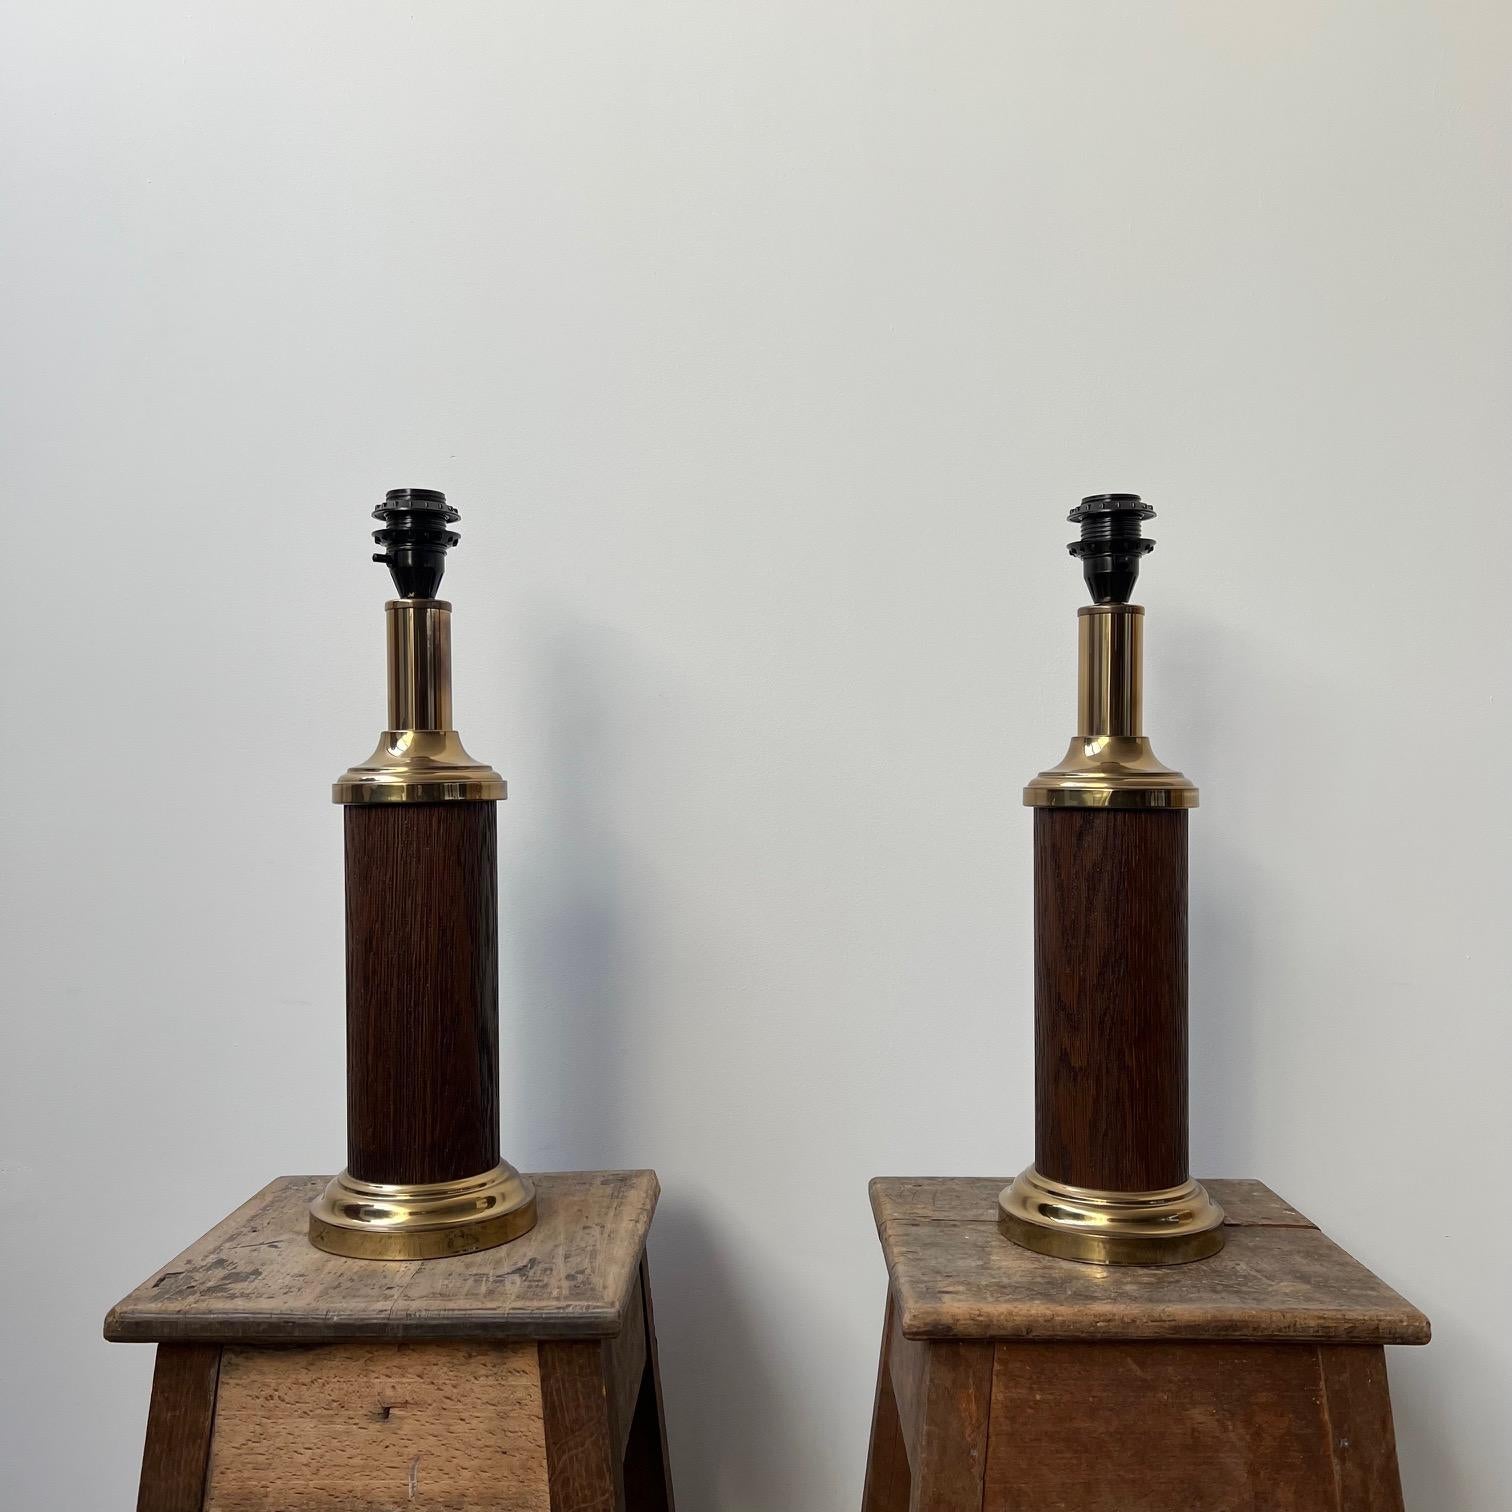 A pair of Swedish wooden and brass table lamps. 

Sweden, c1970s. 

Good condition, since re-wired and PAT tested. 

Location: London Gallery. 

Dimensions: 49 height x 15 diameter in cm. 

Delivery: POA

We can ship around the world.